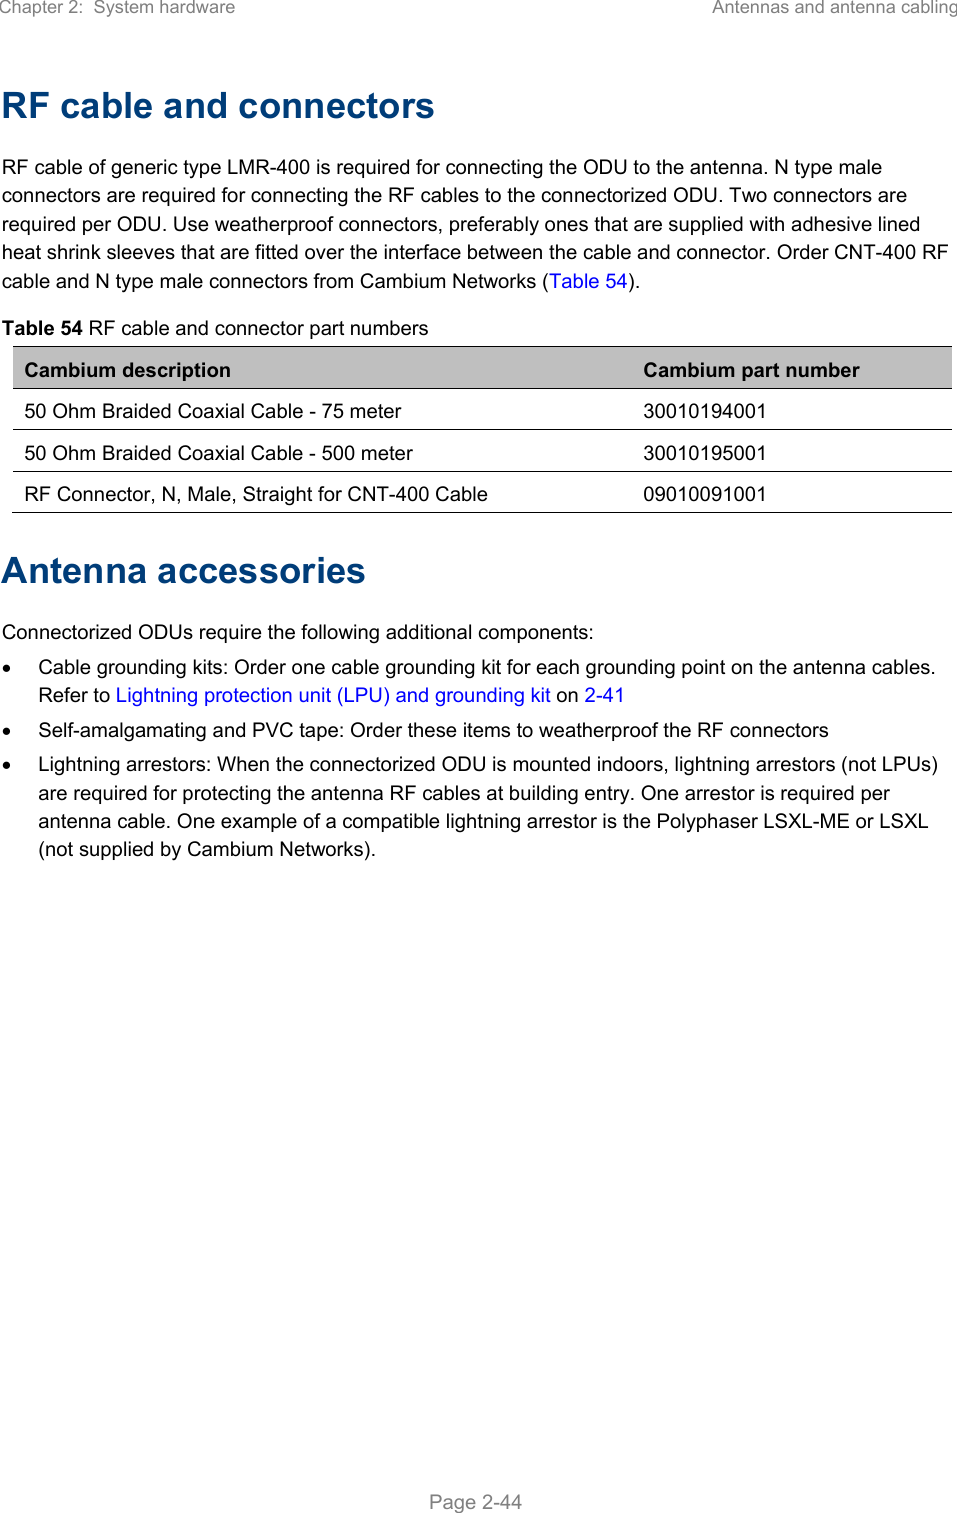 Chapter 2:  System hardware  Antennas and antenna cabling   Page 2-44 RF cable and connectors RF cable of generic type LMR-400 is required for connecting the ODU to the antenna. N type male connectors are required for connecting the RF cables to the connectorized ODU. Two connectors are required per ODU. Use weatherproof connectors, preferably ones that are supplied with adhesive lined heat shrink sleeves that are fitted over the interface between the cable and connector. Order CNT-400 RF cable and N type male connectors from Cambium Networks (Table 54). Table 54 RF cable and connector part numbers Cambium description  Cambium part number 50 Ohm Braided Coaxial Cable - 75 meter 30010194001 50 Ohm Braided Coaxial Cable - 500 meter 30010195001 RF Connector, N, Male, Straight for CNT-400 Cable  09010091001 Antenna accessories Connectorized ODUs require the following additional components:   Cable grounding kits: Order one cable grounding kit for each grounding point on the antenna cables. Refer to Lightning protection unit (LPU) and grounding kit on 2-41   Self-amalgamating and PVC tape: Order these items to weatherproof the RF connectors   Lightning arrestors: When the connectorized ODU is mounted indoors, lightning arrestors (not LPUs) are required for protecting the antenna RF cables at building entry. One arrestor is required per antenna cable. One example of a compatible lightning arrestor is the Polyphaser LSXL-ME or LSXL (not supplied by Cambium Networks). 